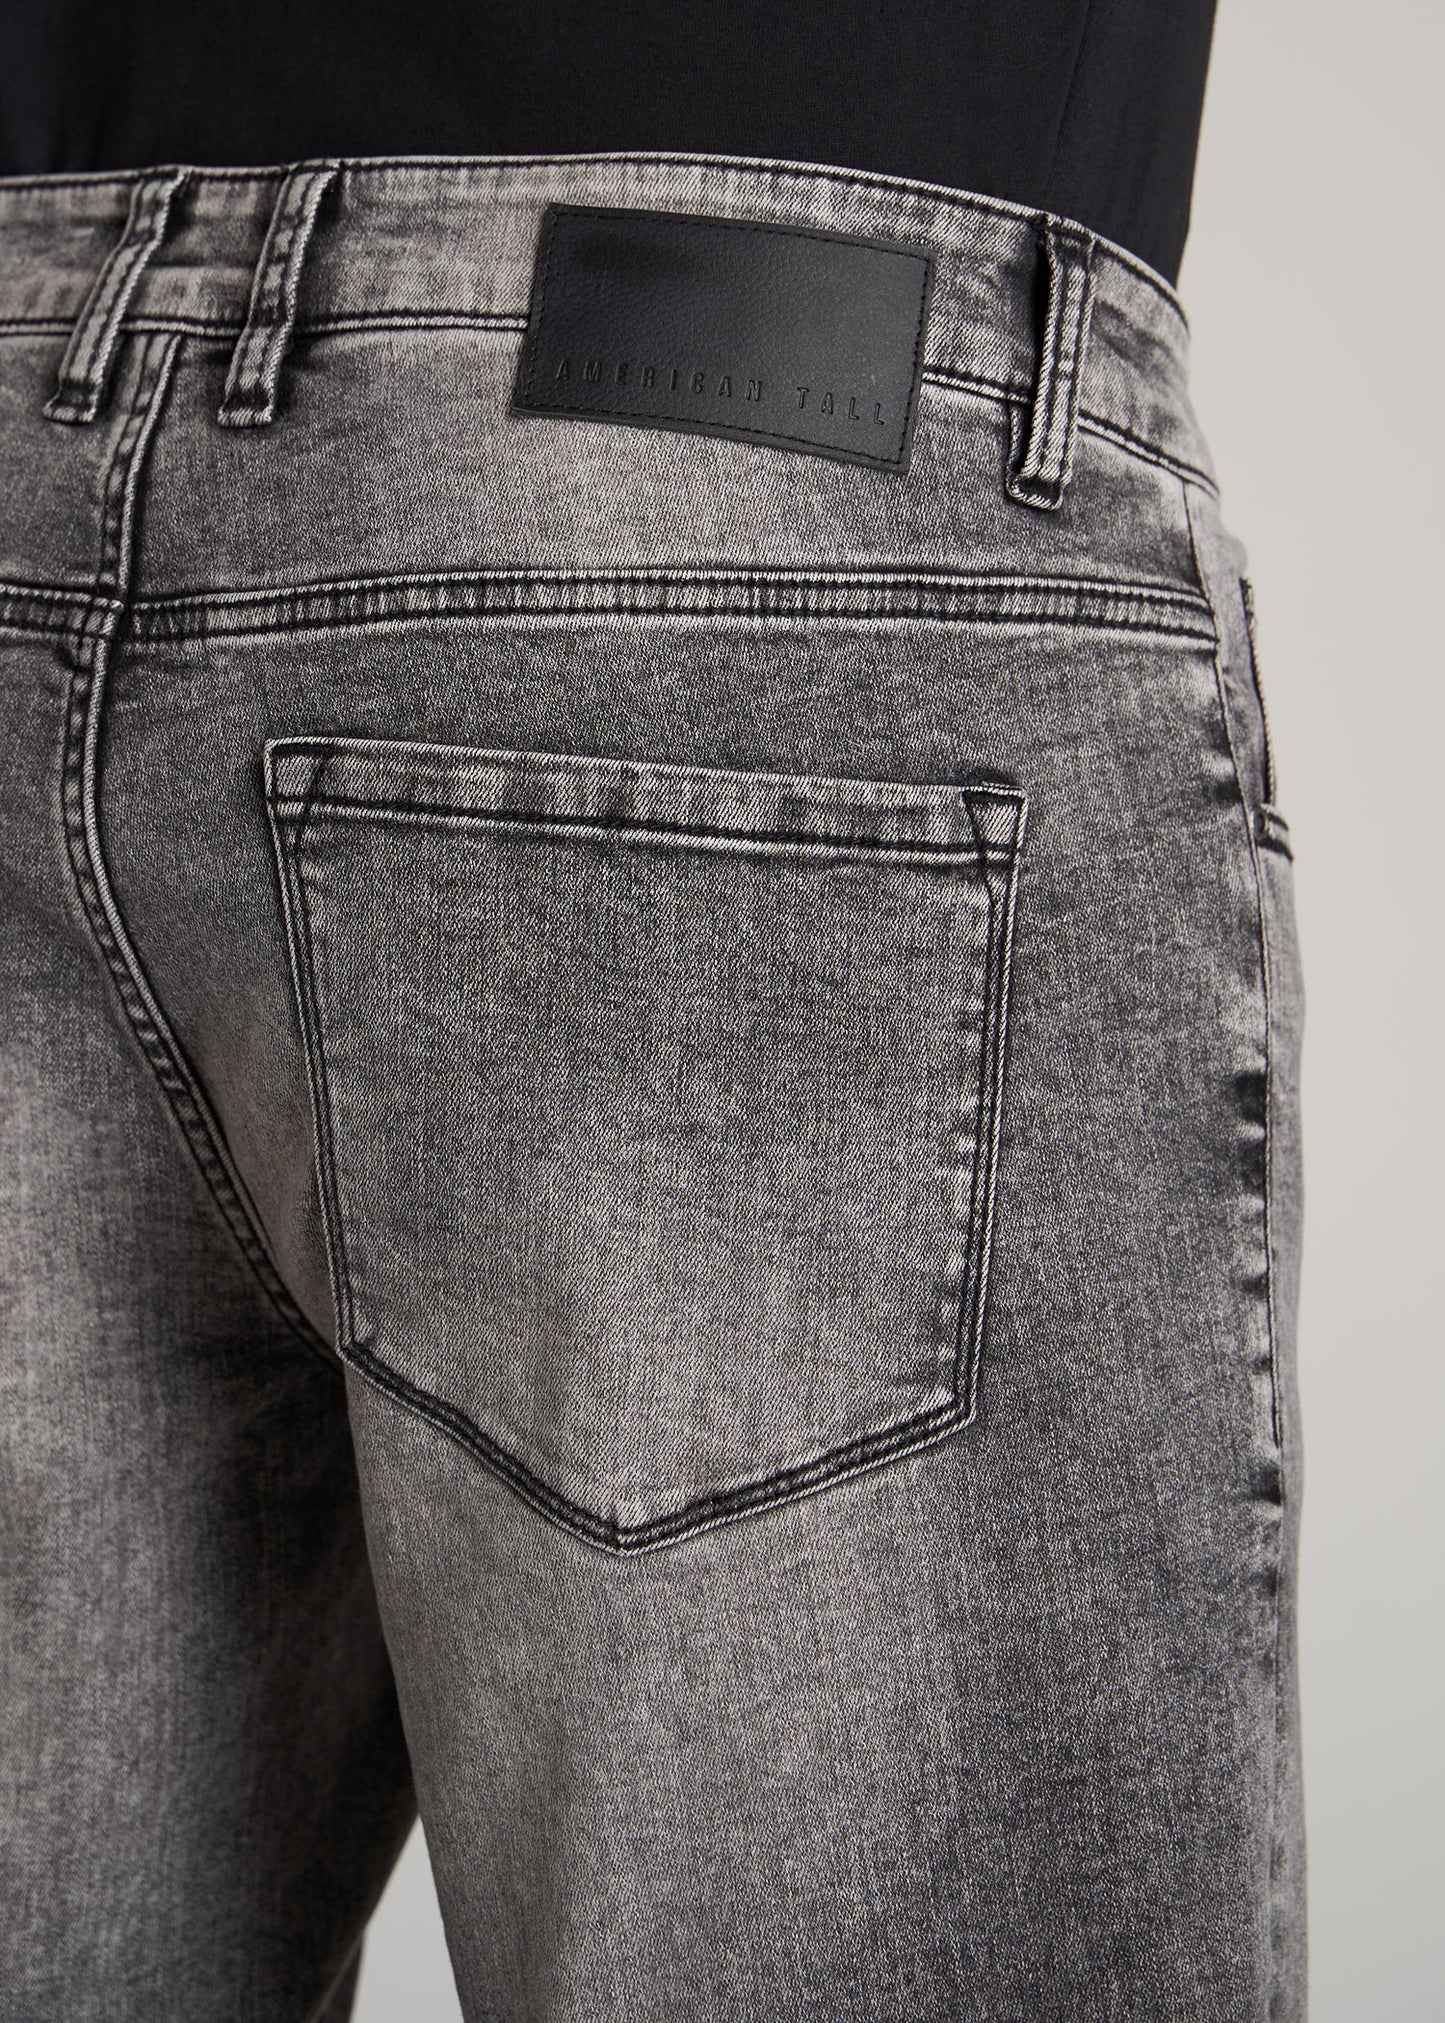     American-Tall-Men-Carman-Tapered-Fit-Jeans-Washed-Faded-Black-detail